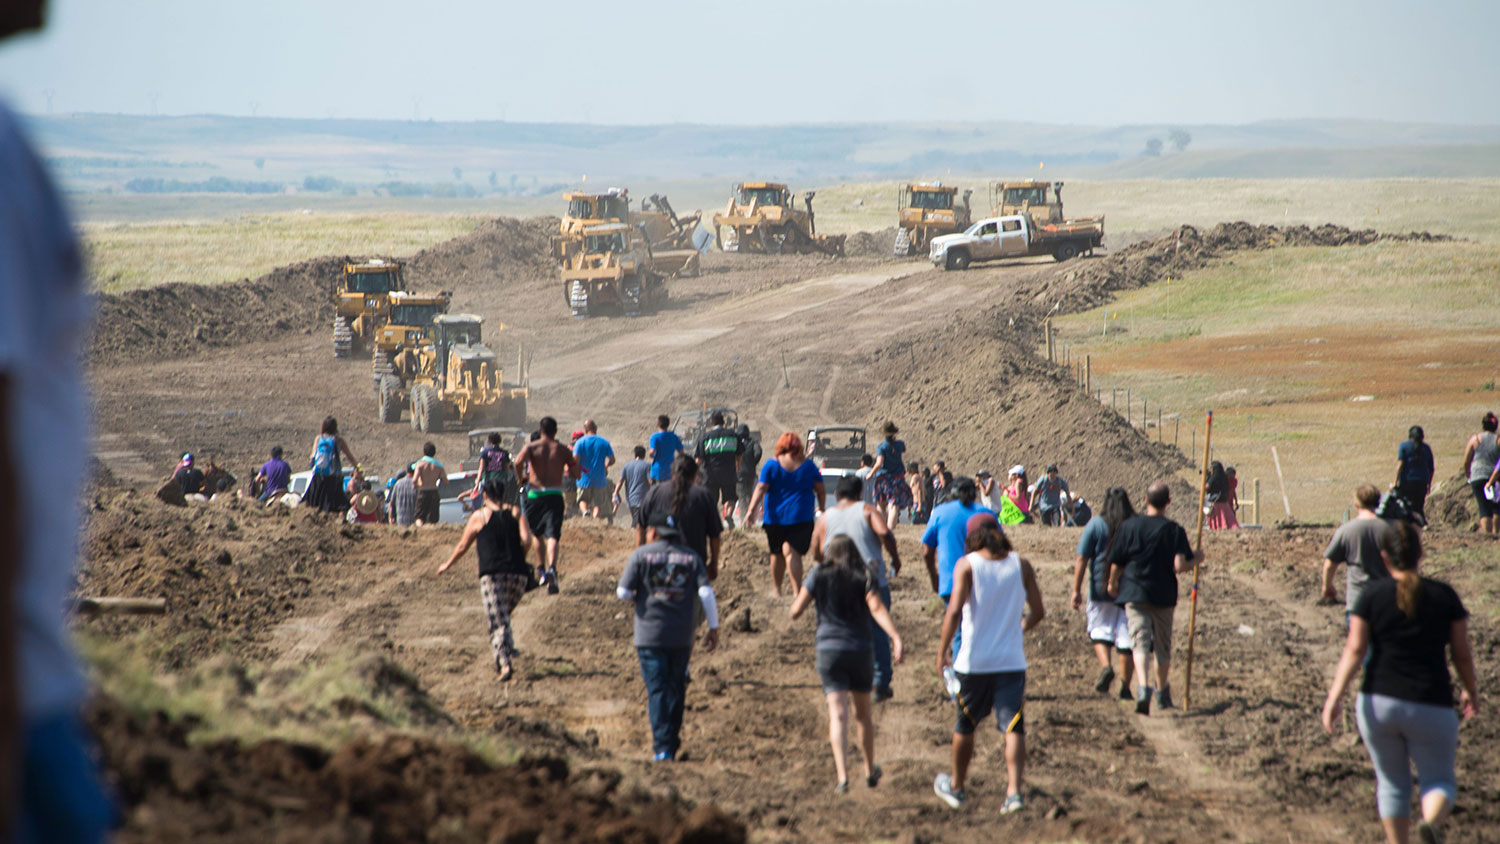 Native American protestors and their supporters are confronted by security during a demonstration against work being done for the Dakota Access Pipeline near Cannon Ball, North Dakota, on Sept. 3, 2016.
